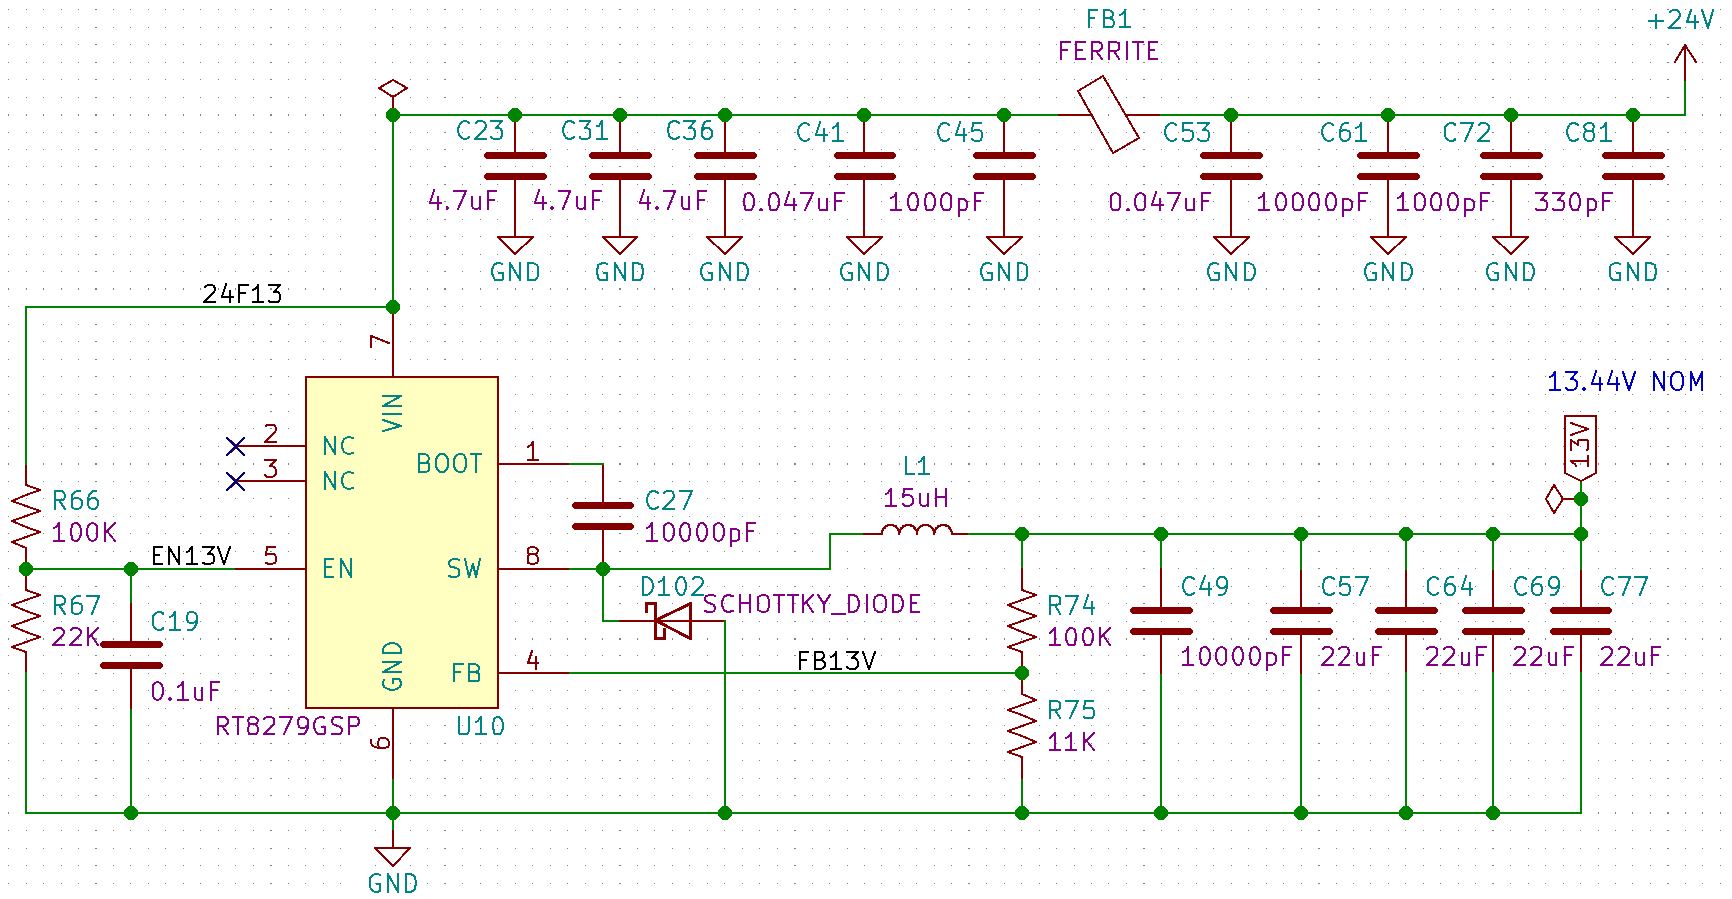 The switching regulator to drop the 24V down to 13V.